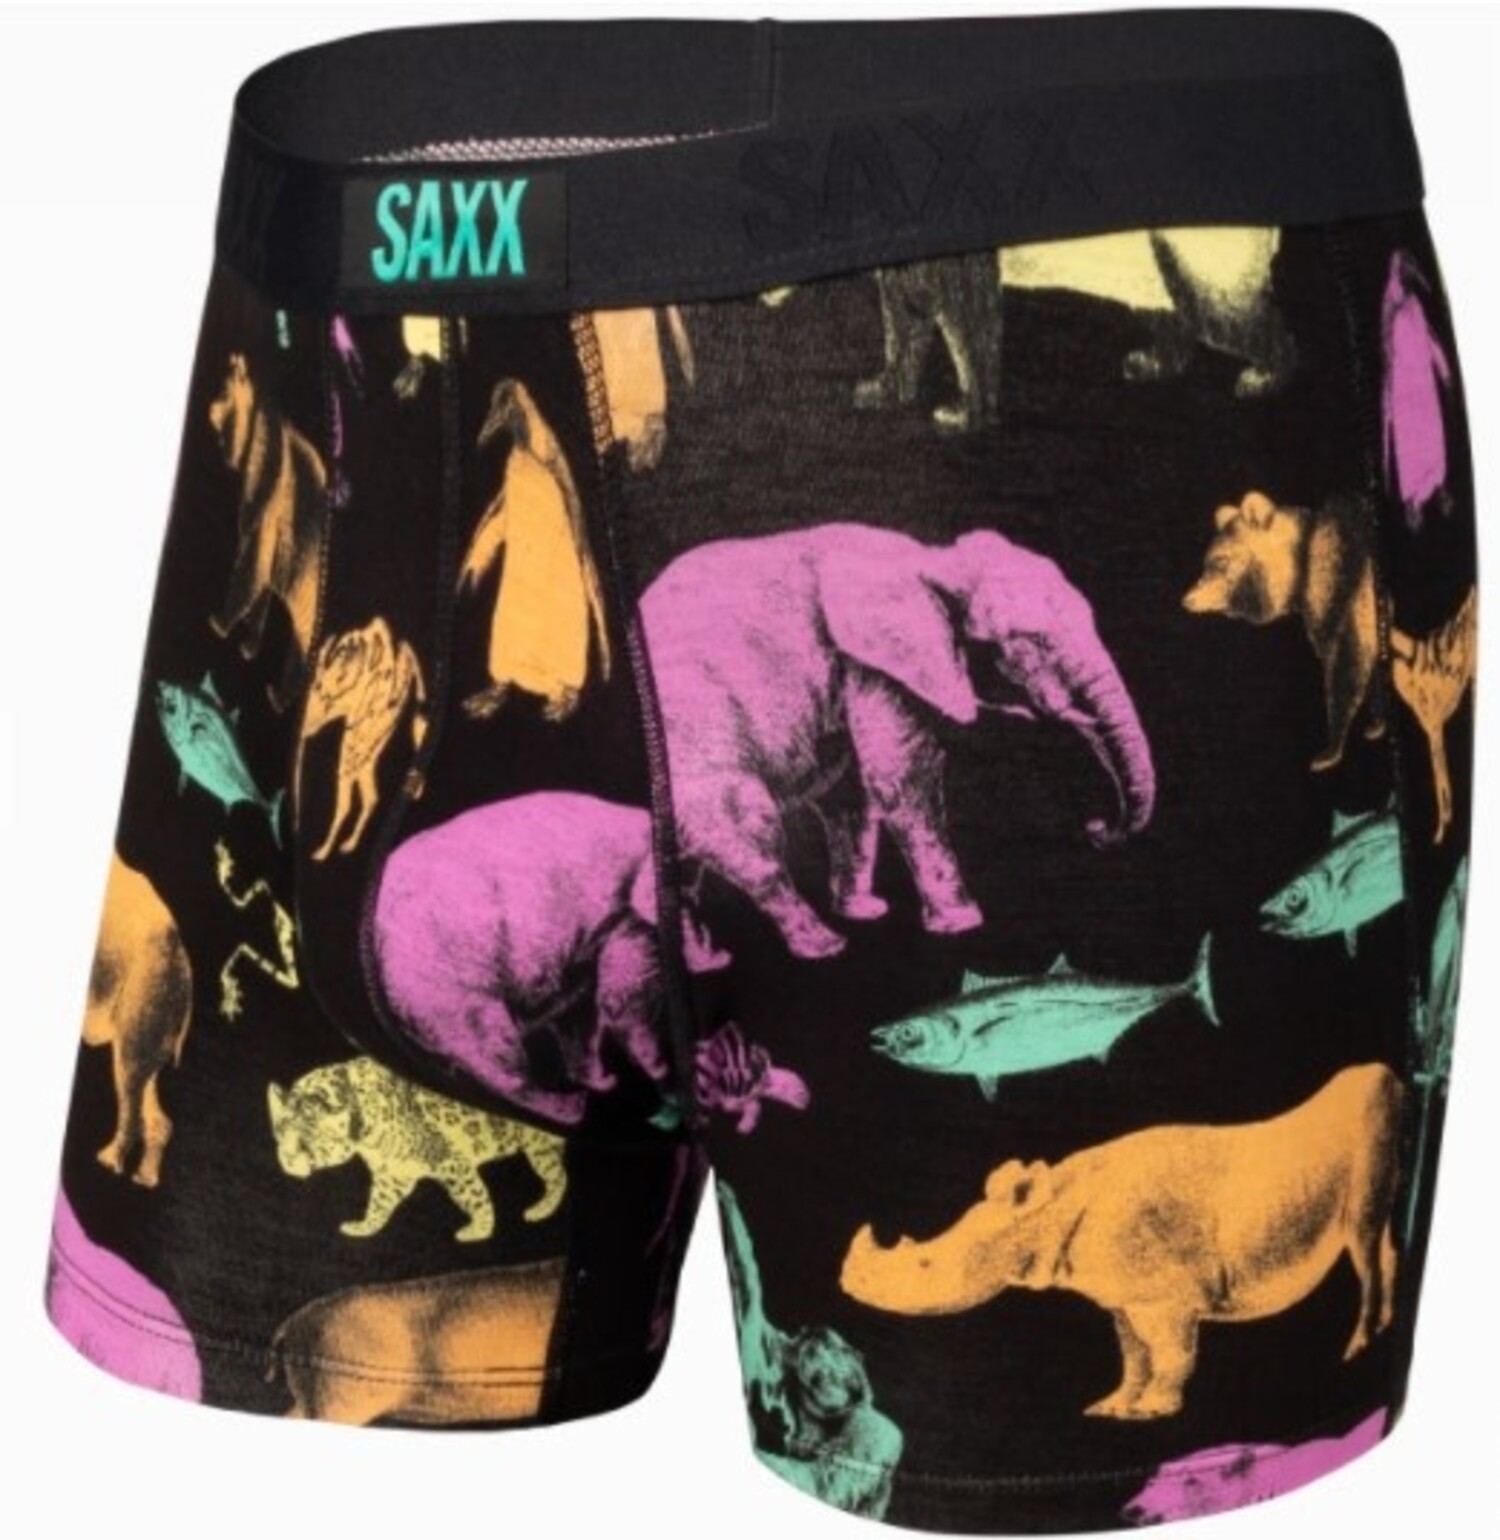 Vibe by SAXX Underwear - these best - Beyond The Usual